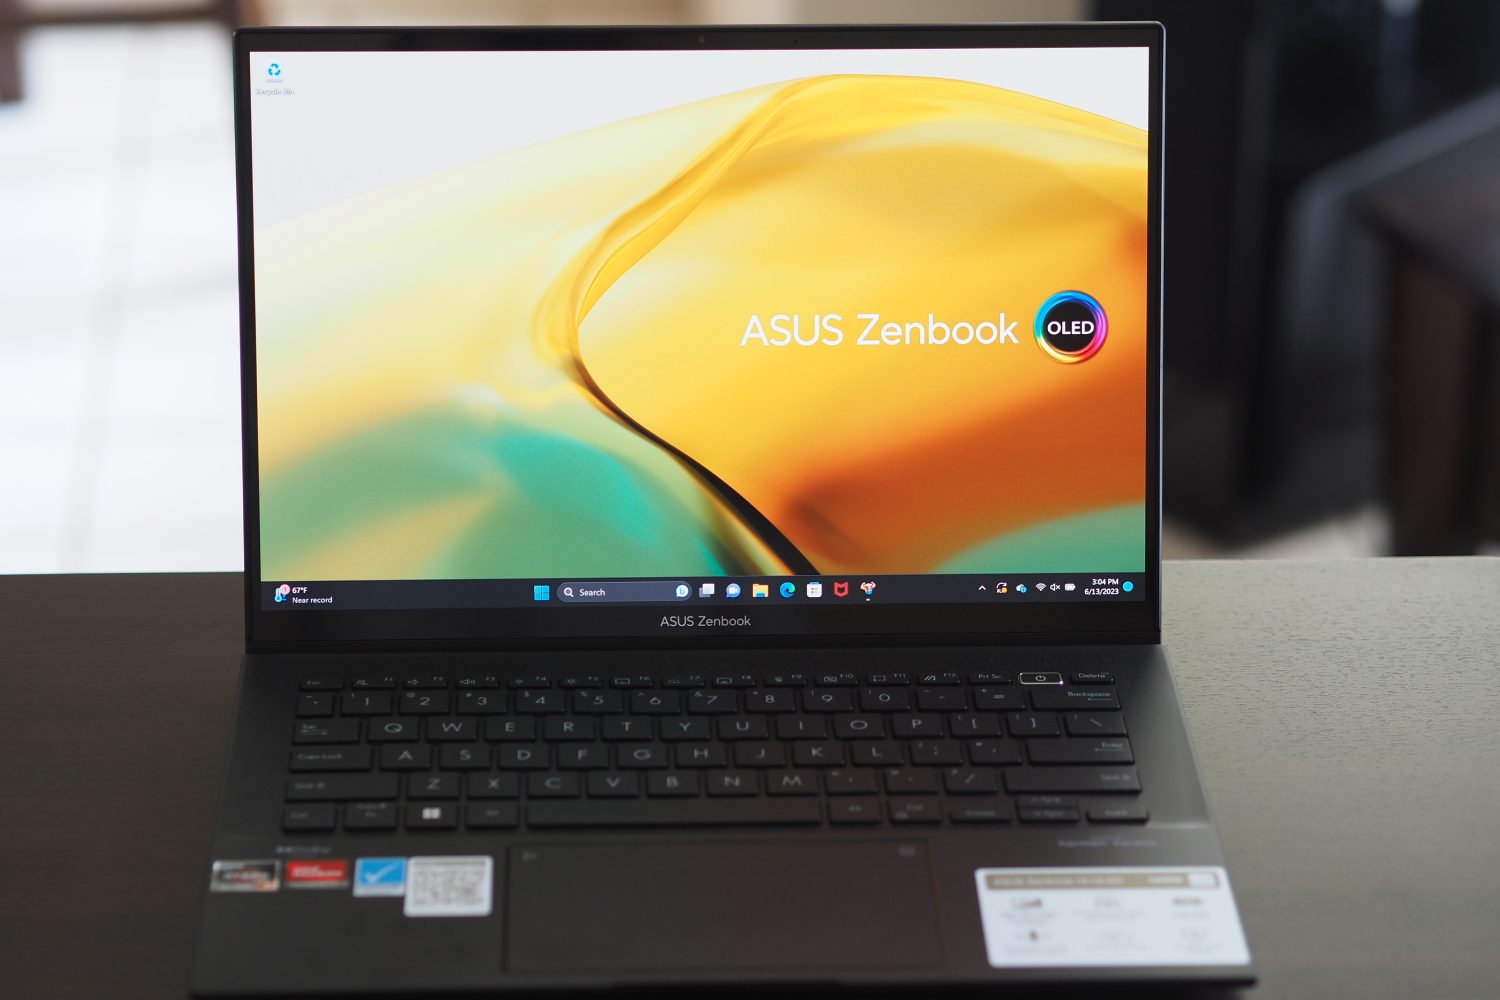 Asus Zenbook 14 OLED review: OLED on the cheap